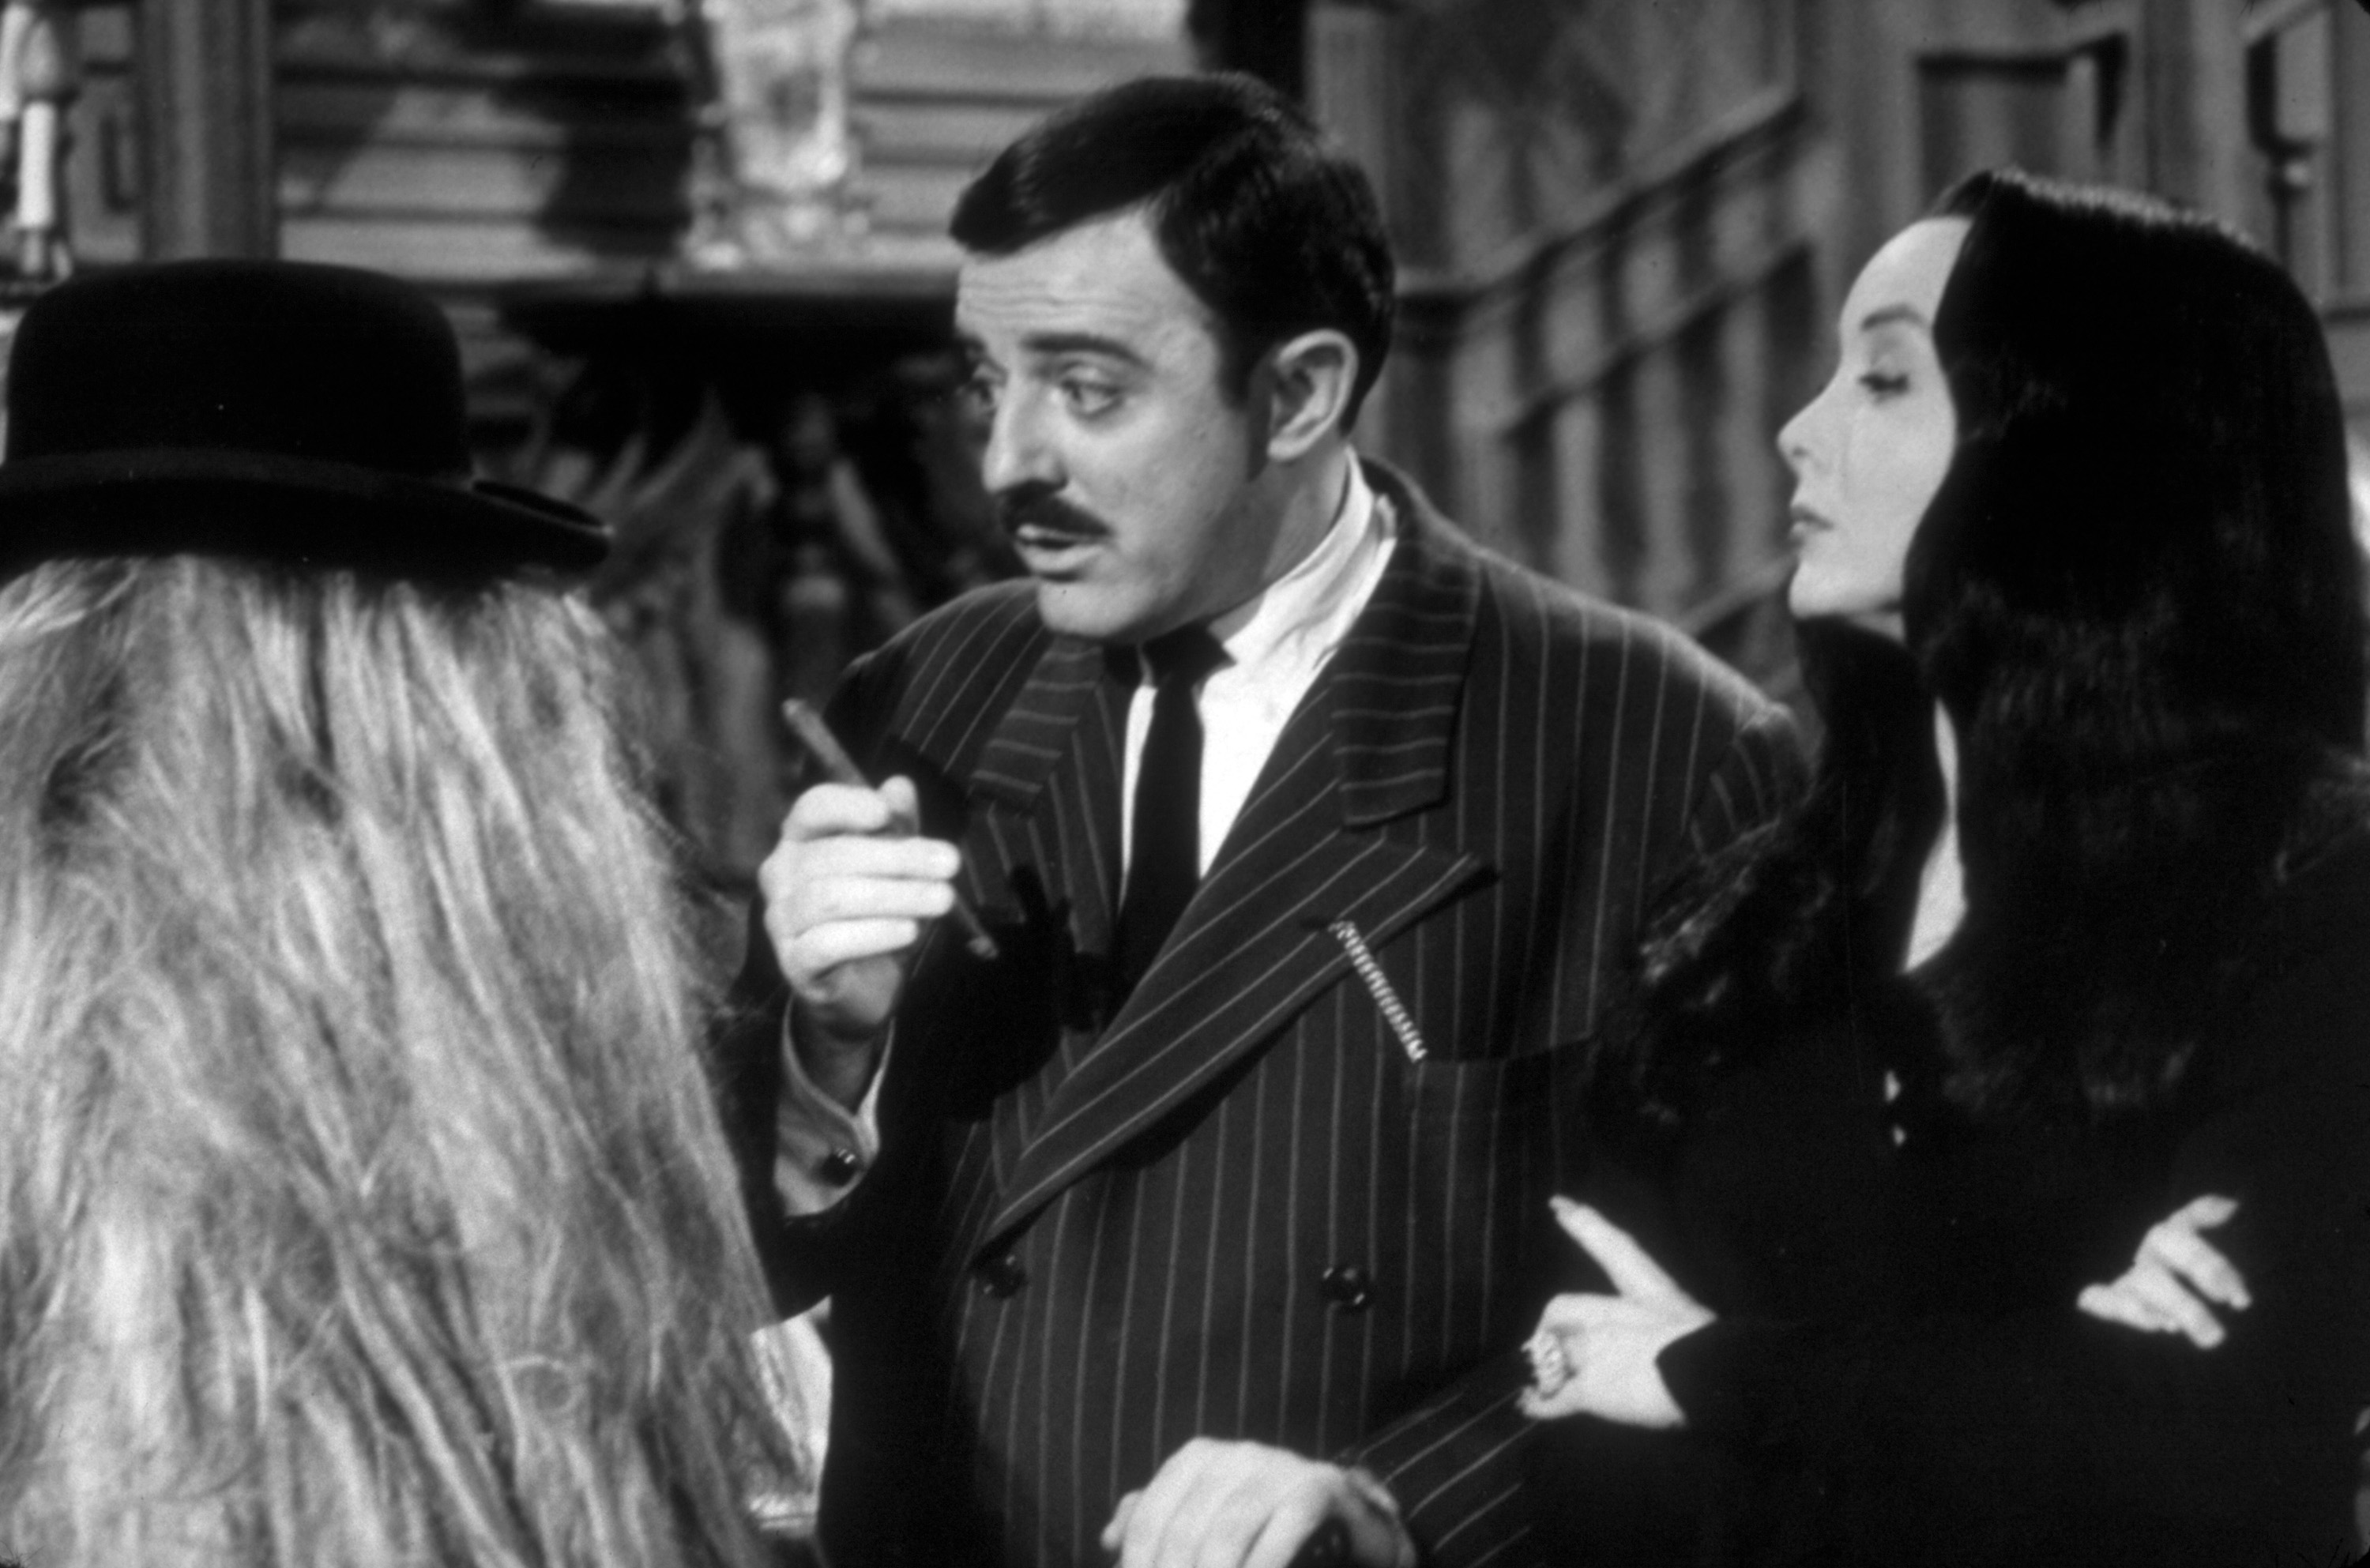 'The Addams Family' stars John Astin and Carolyn Jones as Gomez and Morticia Addams in a scene from the series.